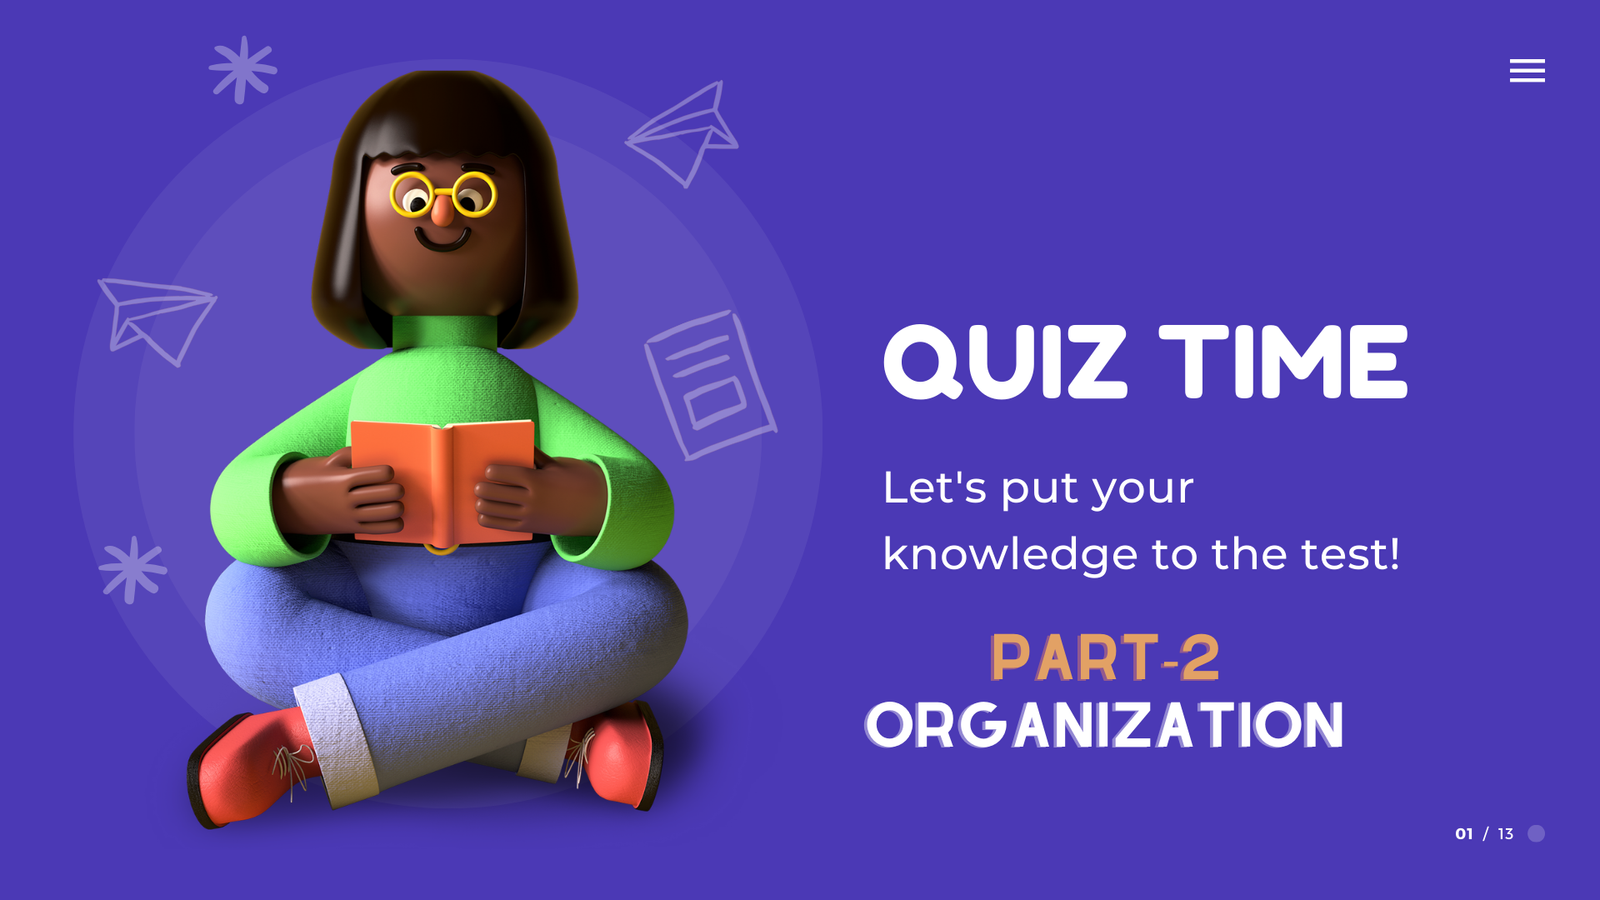 General Knowledge About Organization